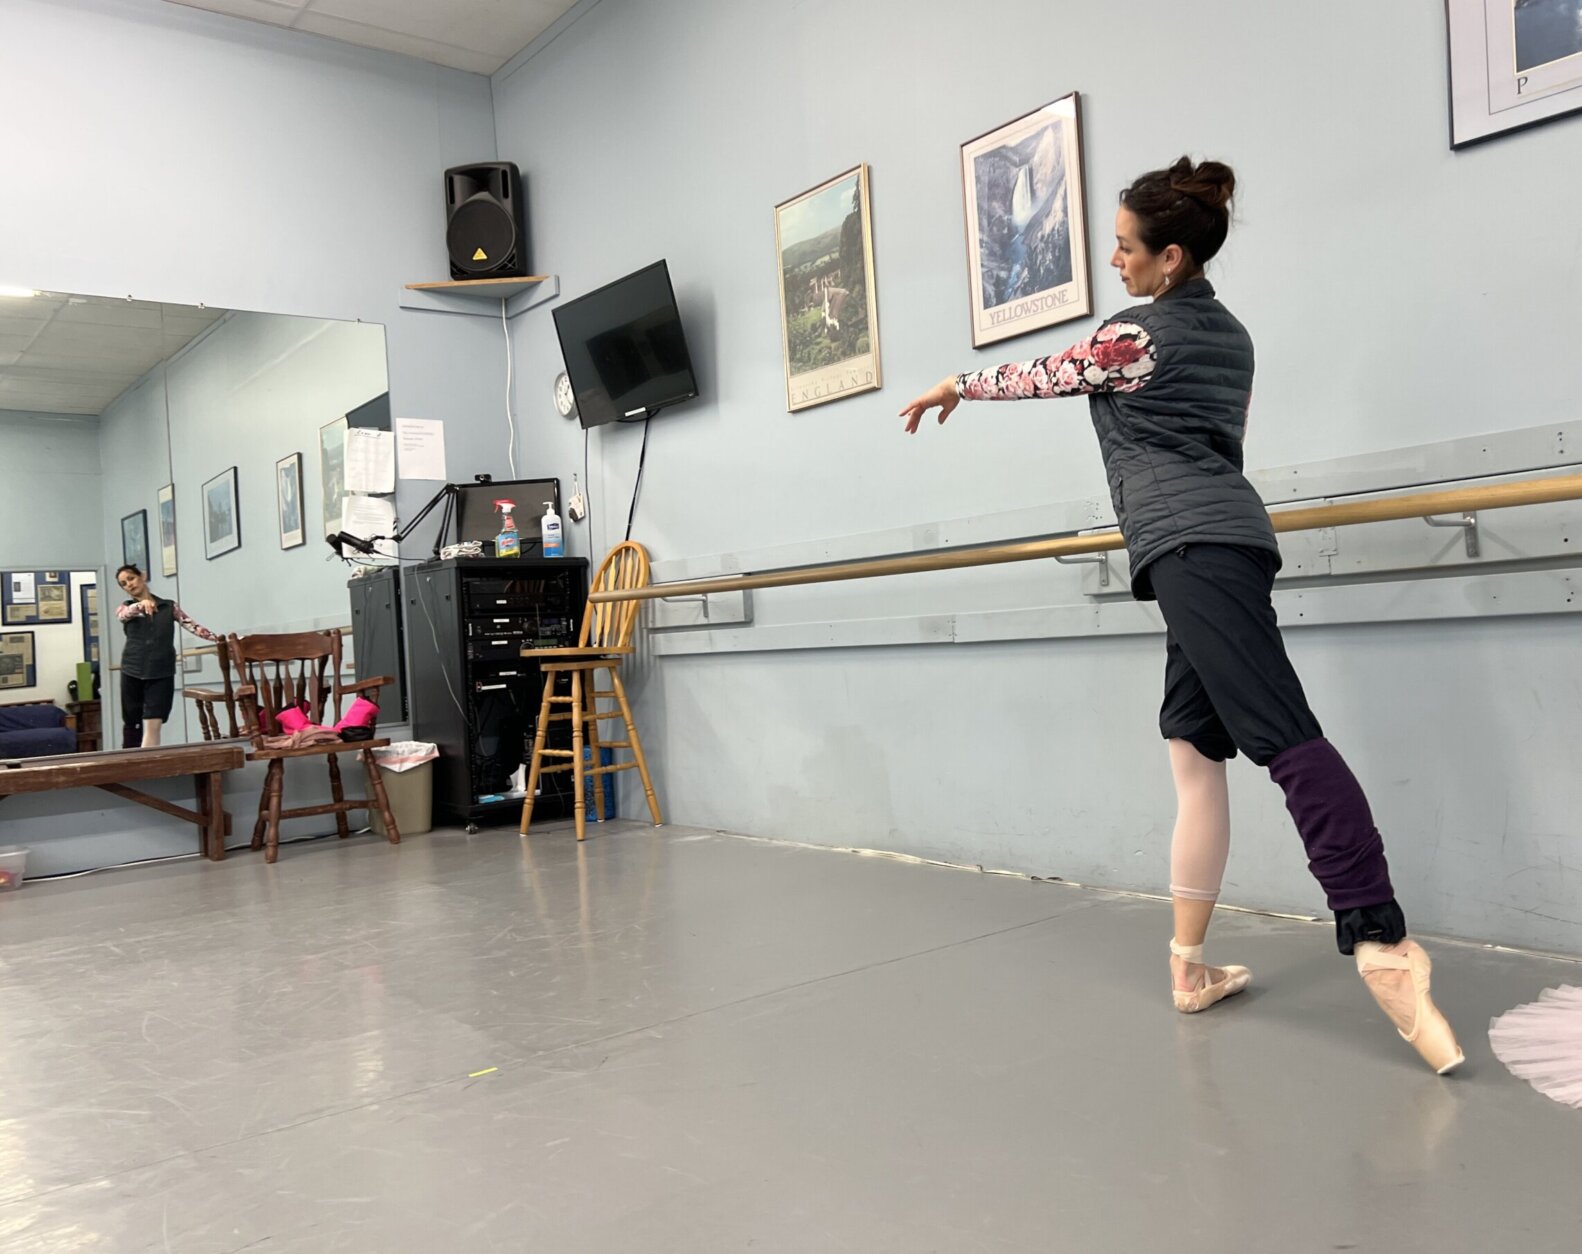 Moya warms up her feet at the barre before performing a solo.